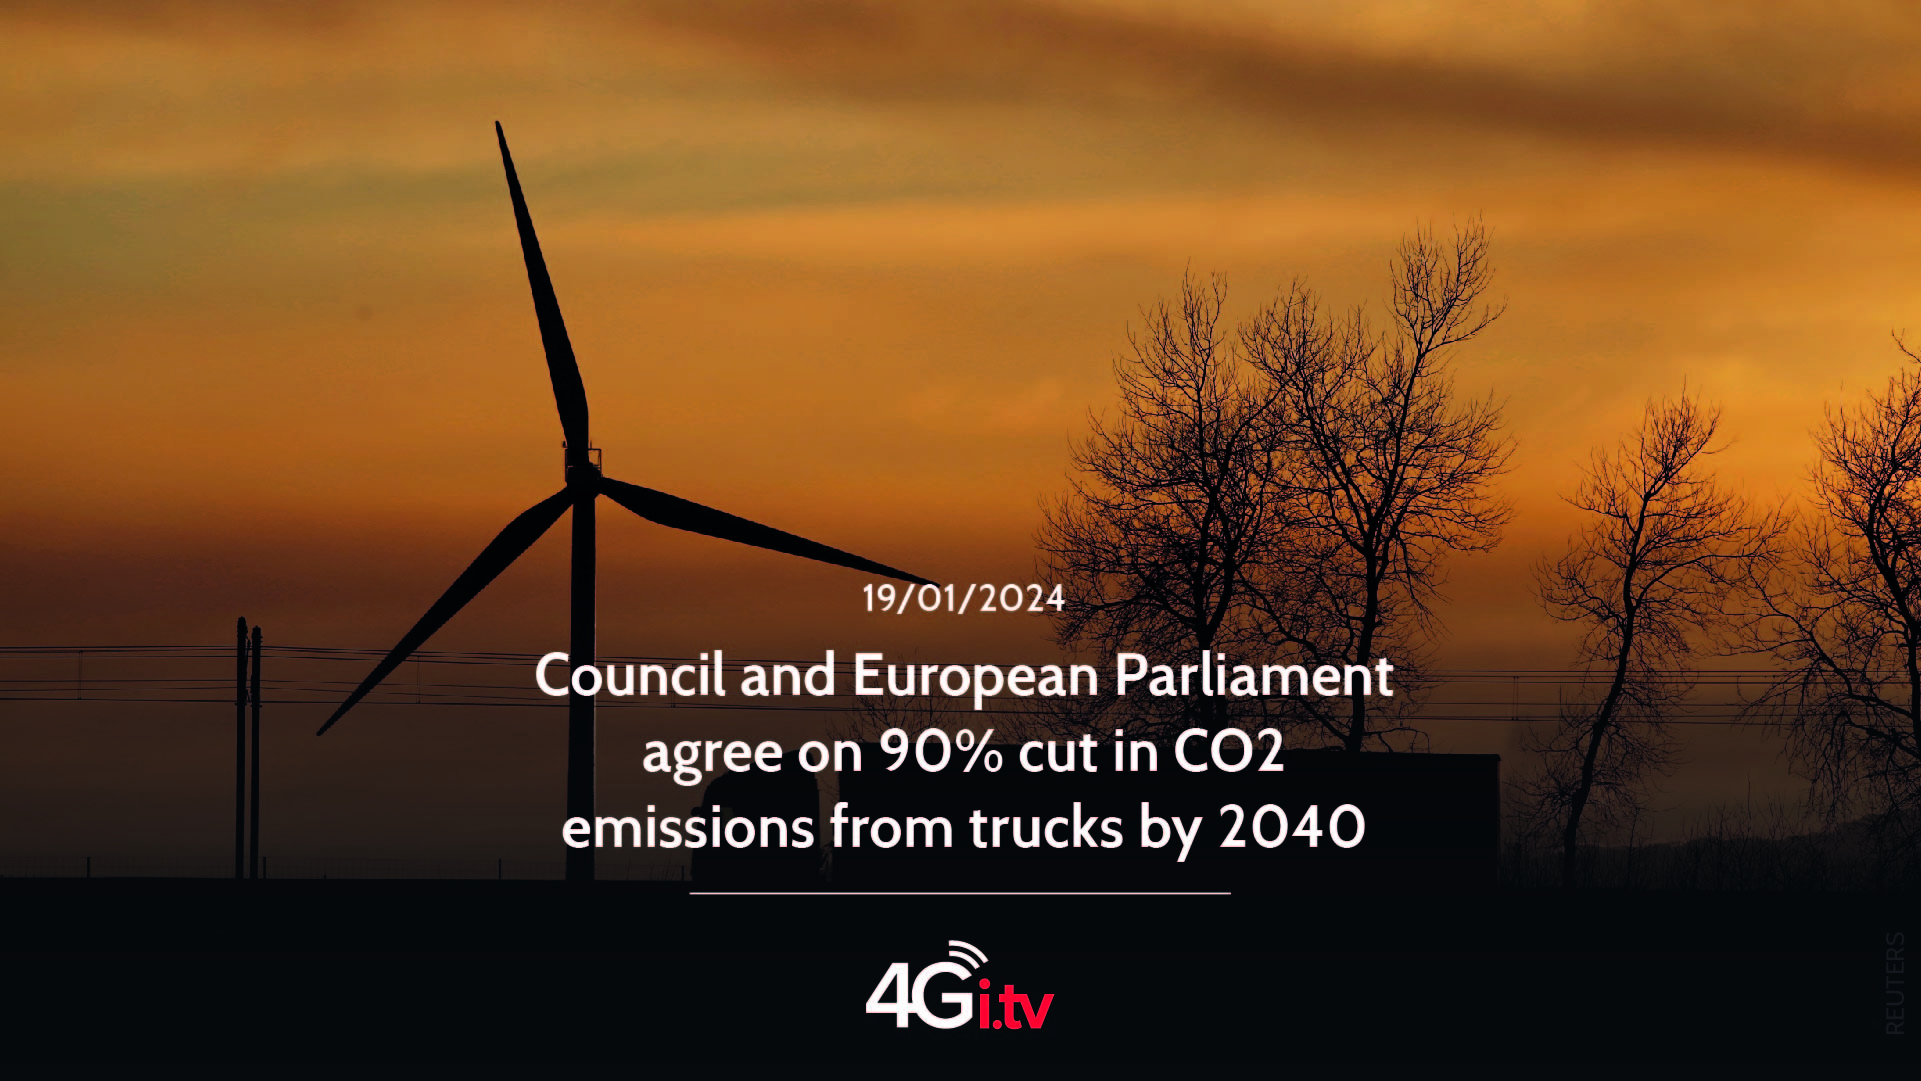 Подробнее о статье Council and European Parliament agree on 90% cut in CO2 emissions from trucks by 2040